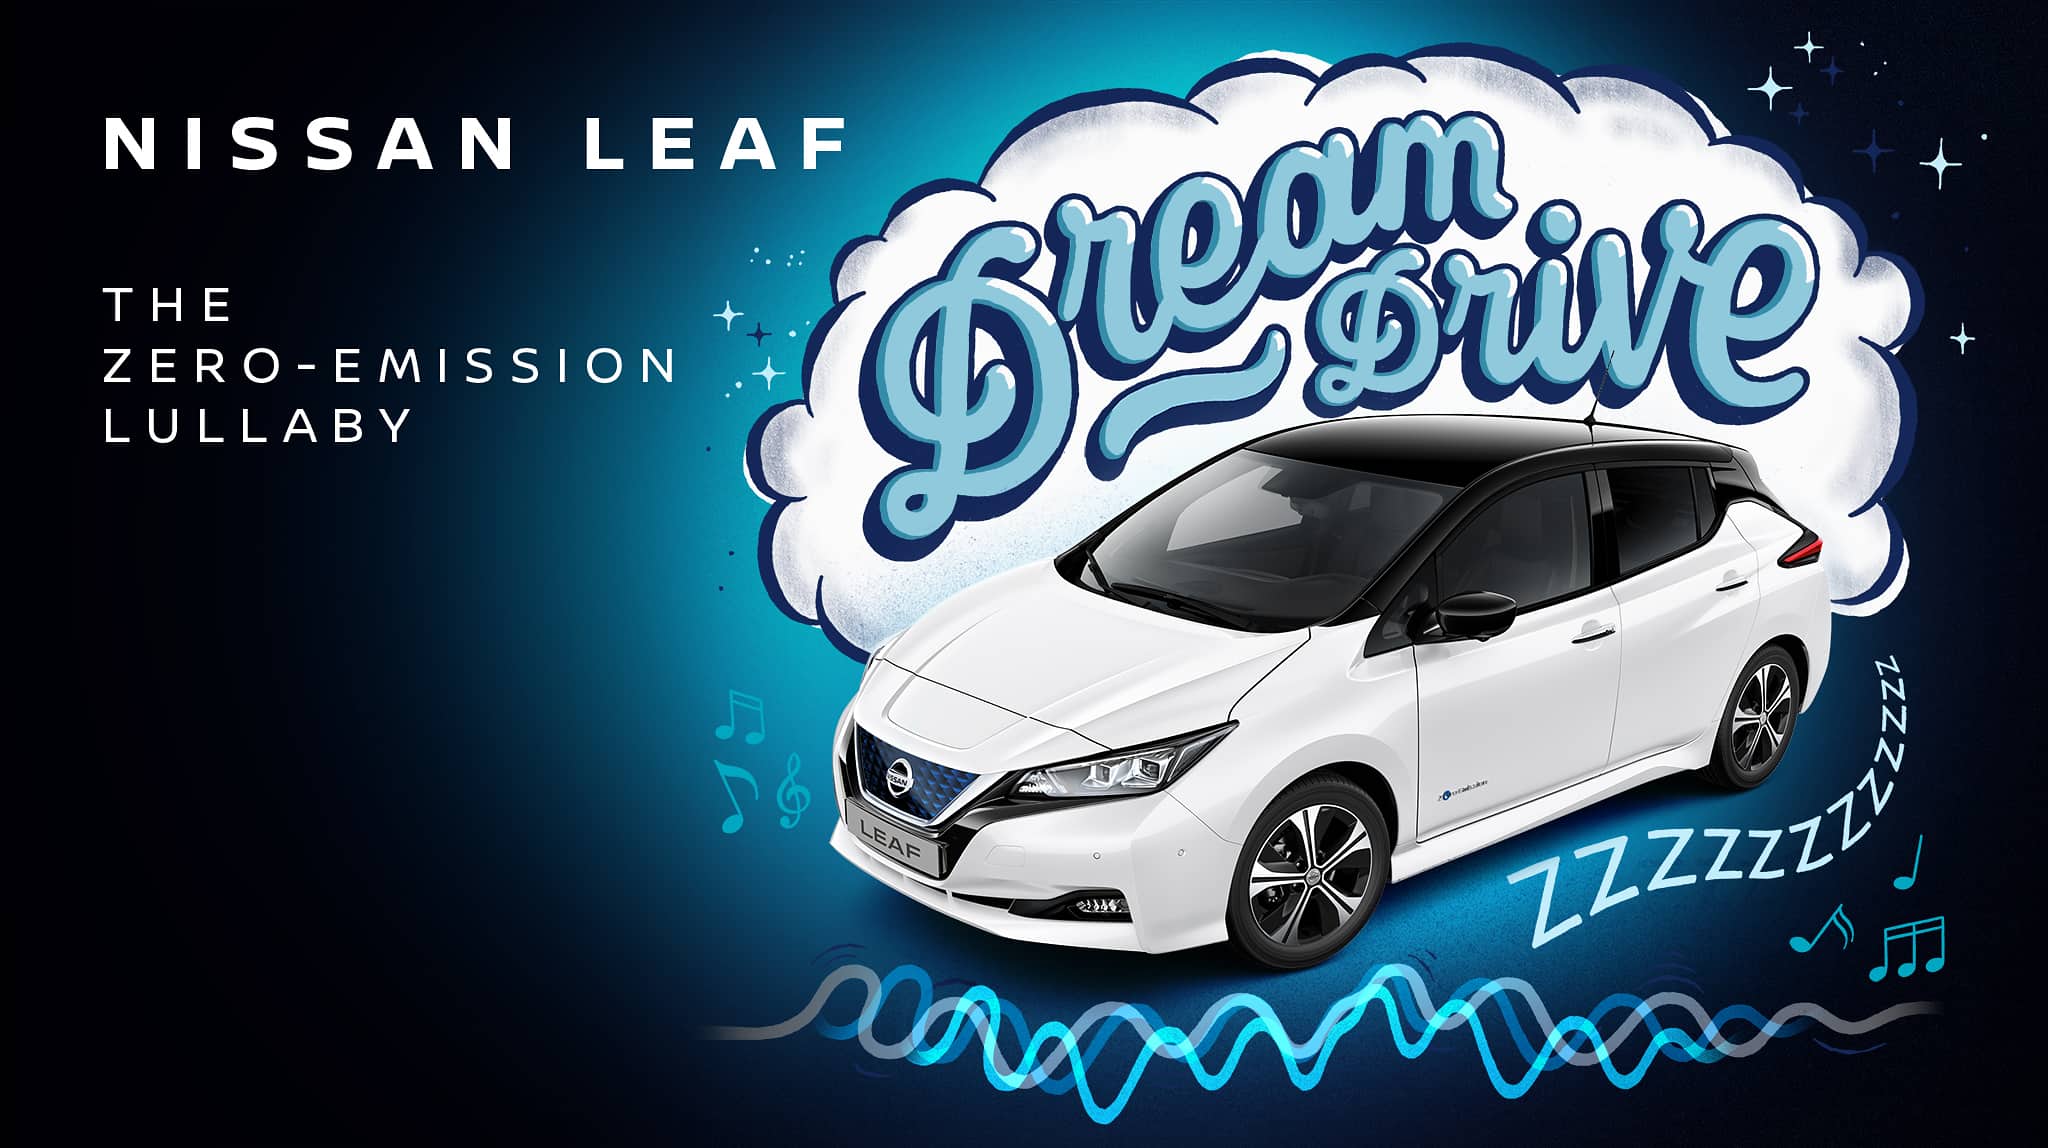 Nissan lullaby, Nissan turns Leaf EV into ‘zero-emission lullaby’ machine, ClassicCars.com Journal